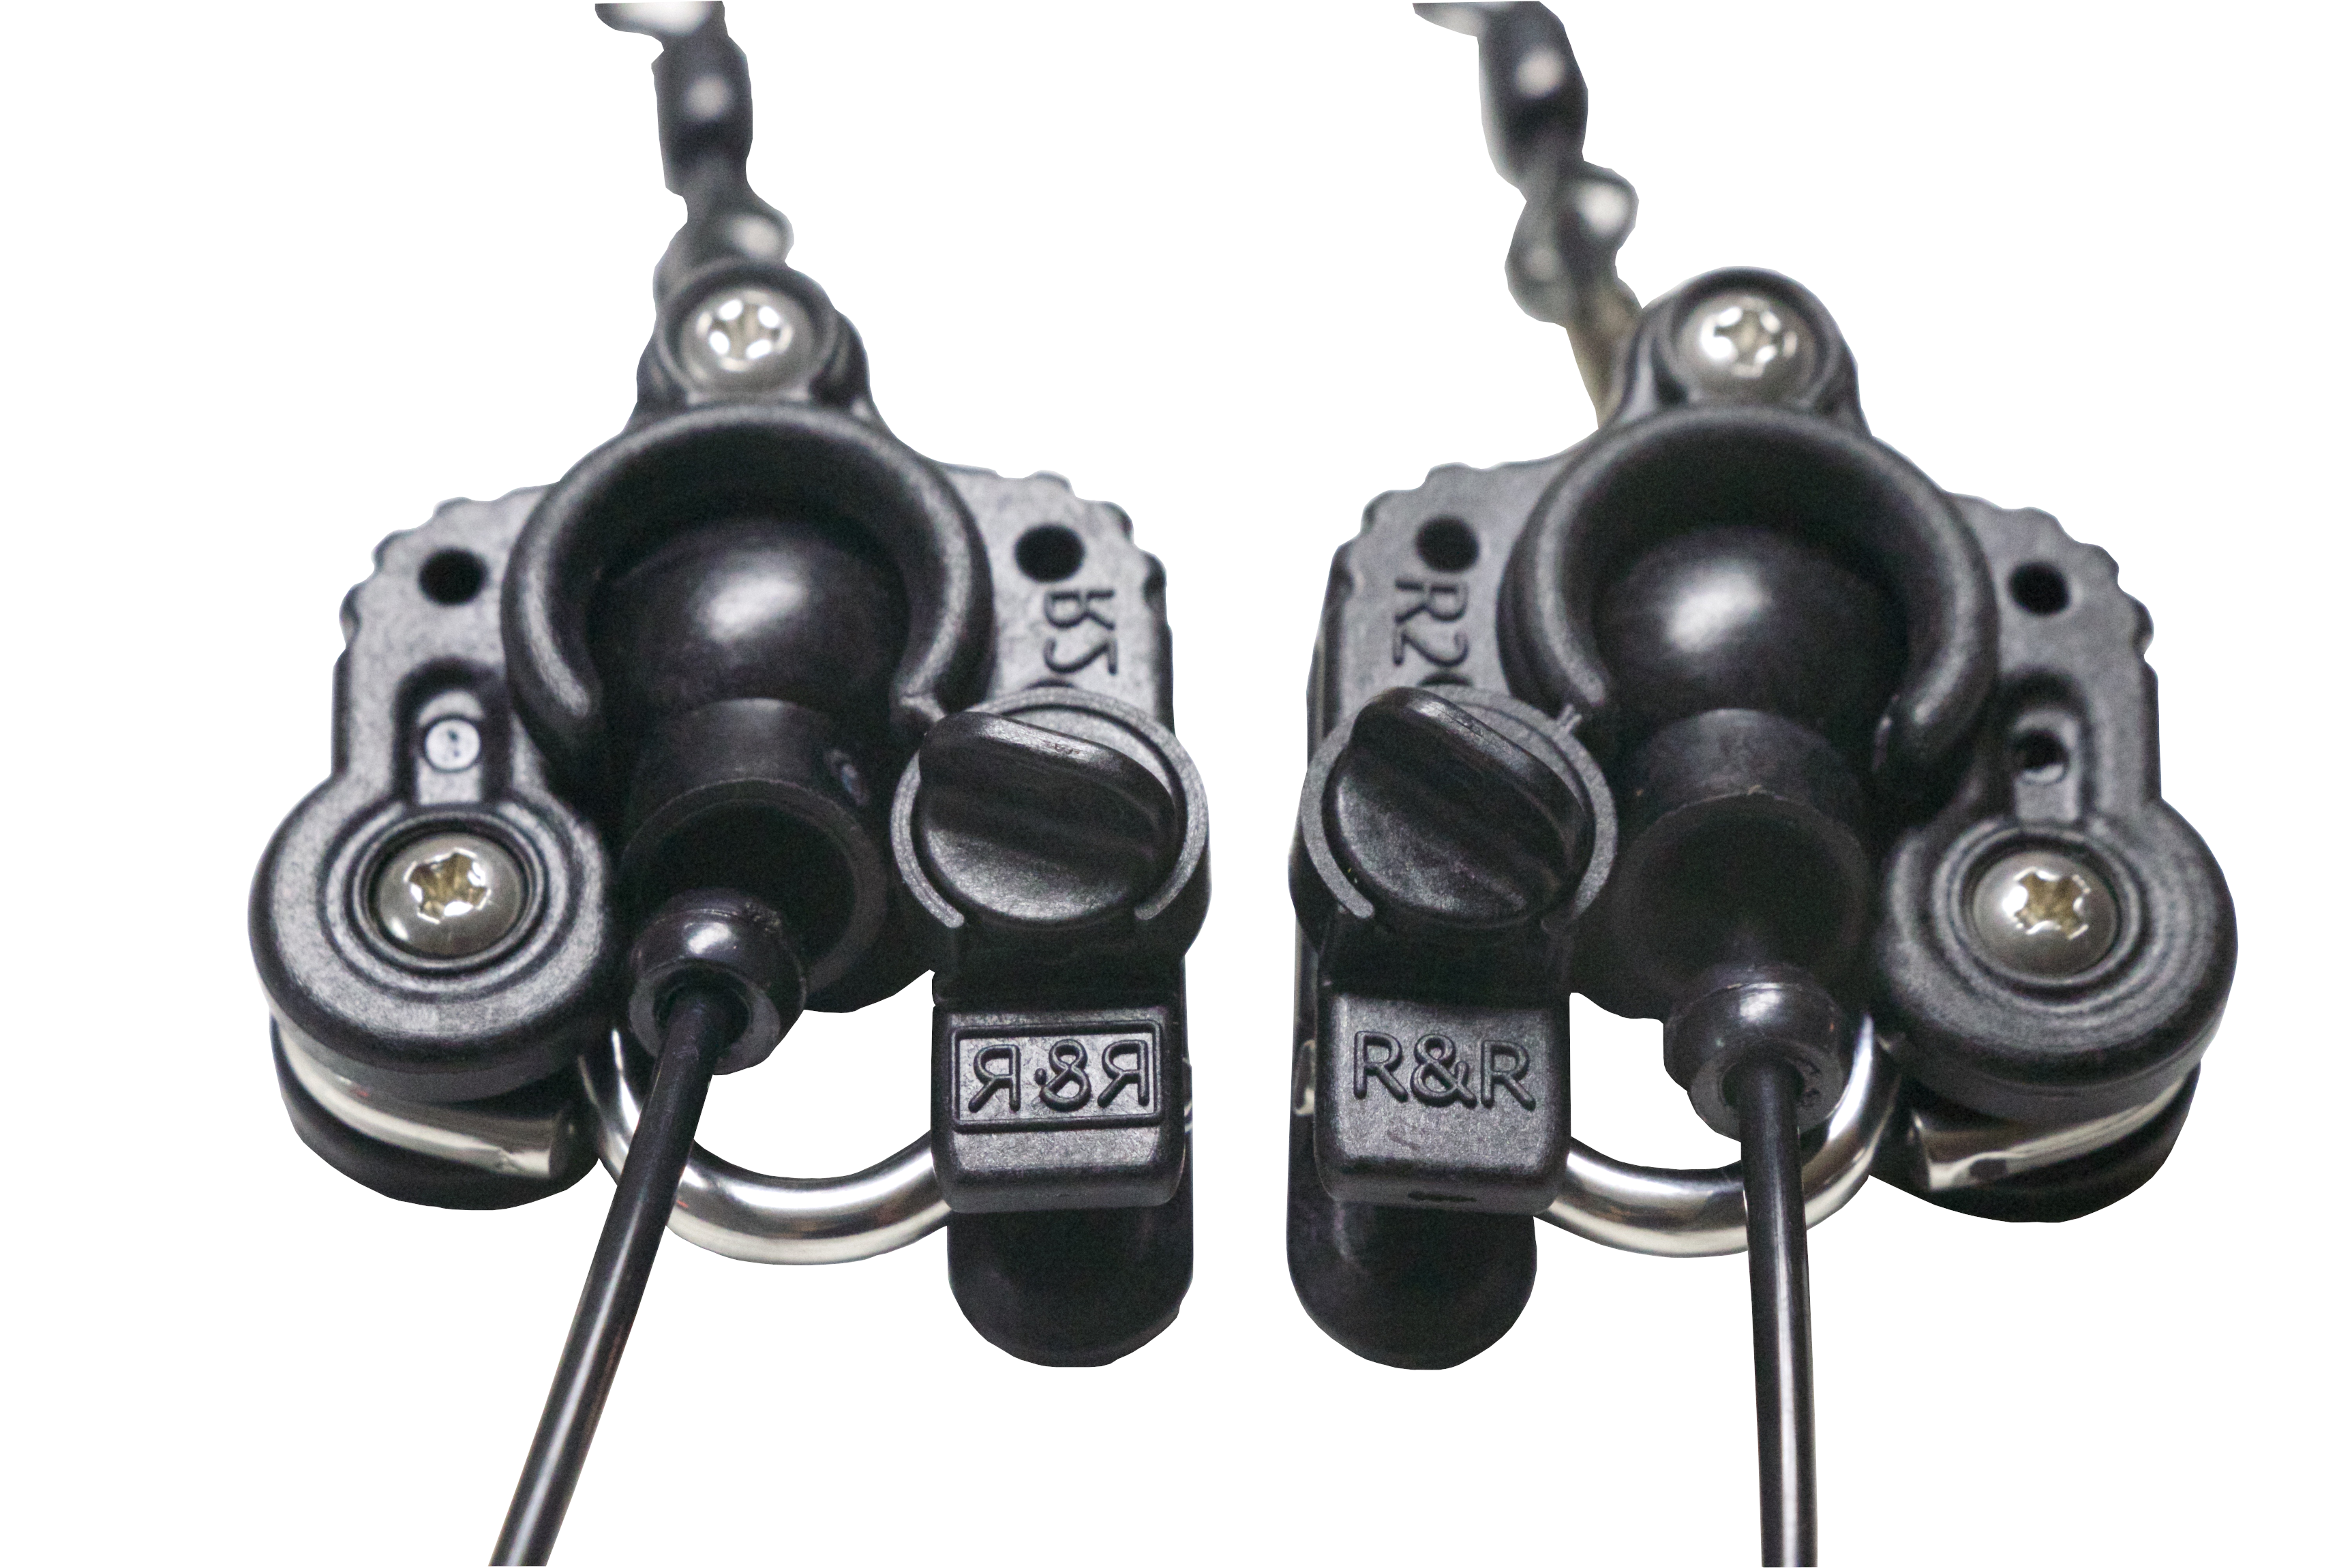 R2 Outrigger/Downrigger Clips – R&R Tackle Co.